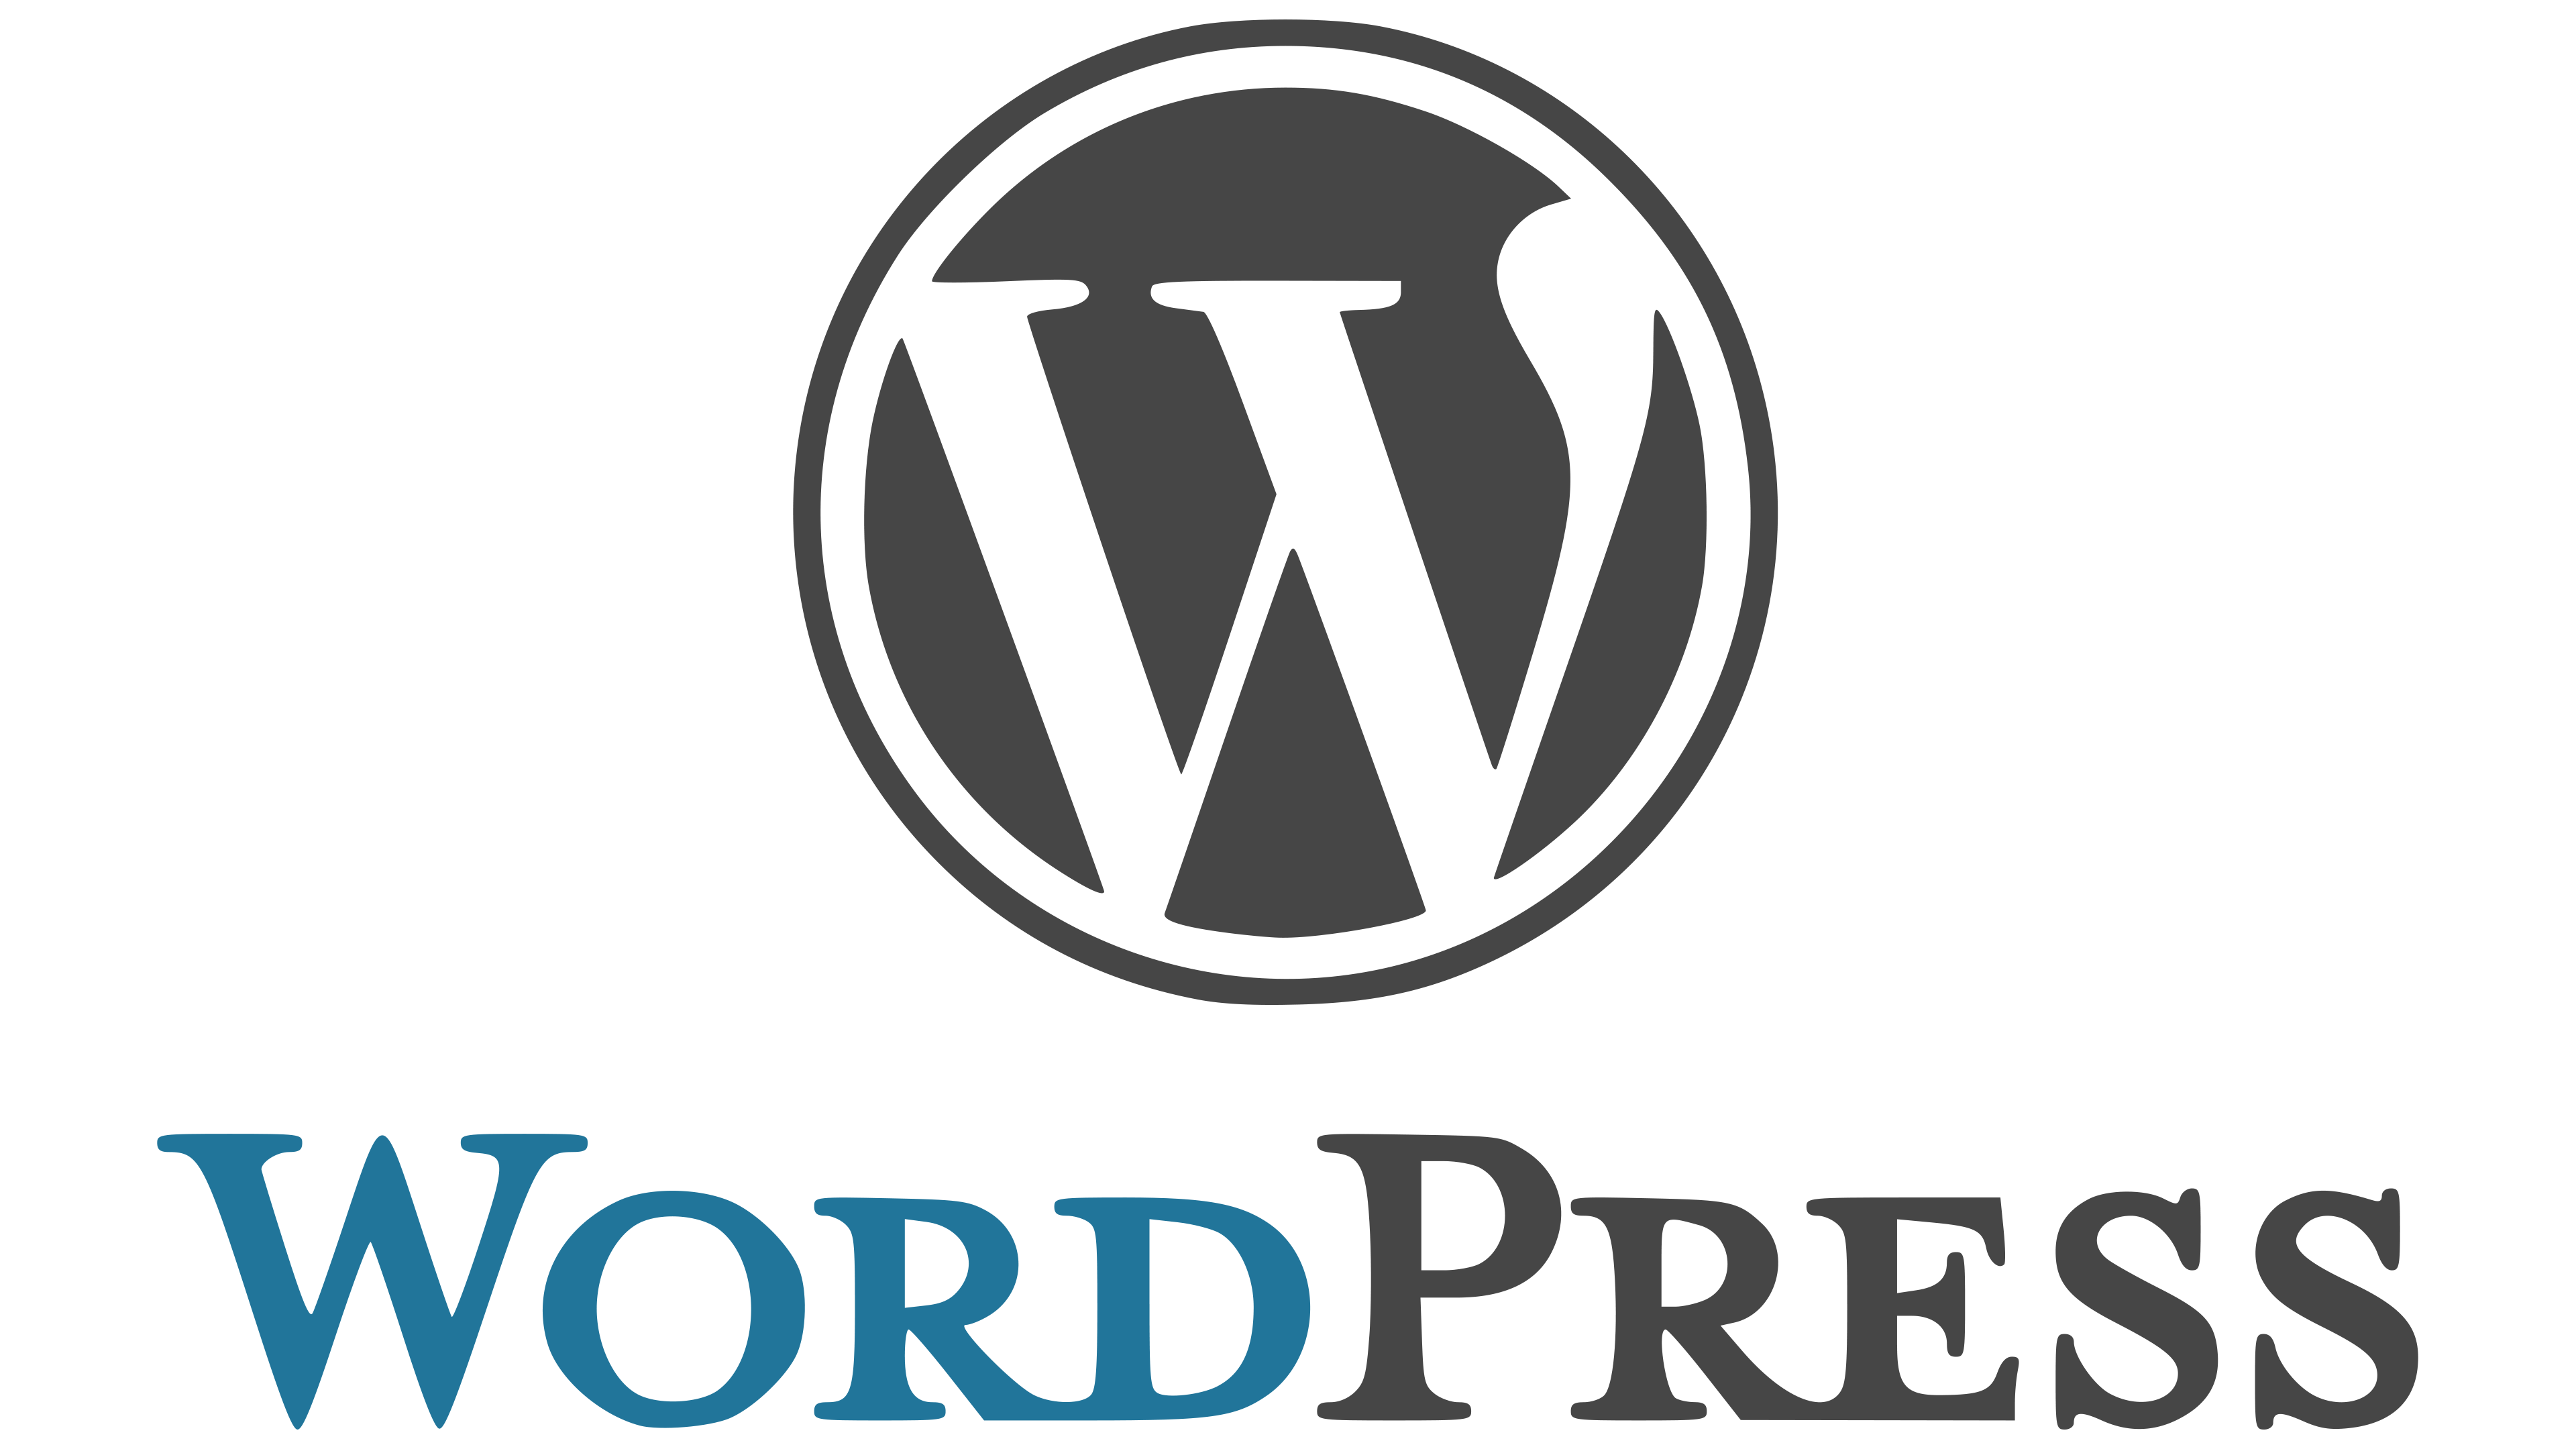 Missions as an executive assistant: WordPress to create and manage websites